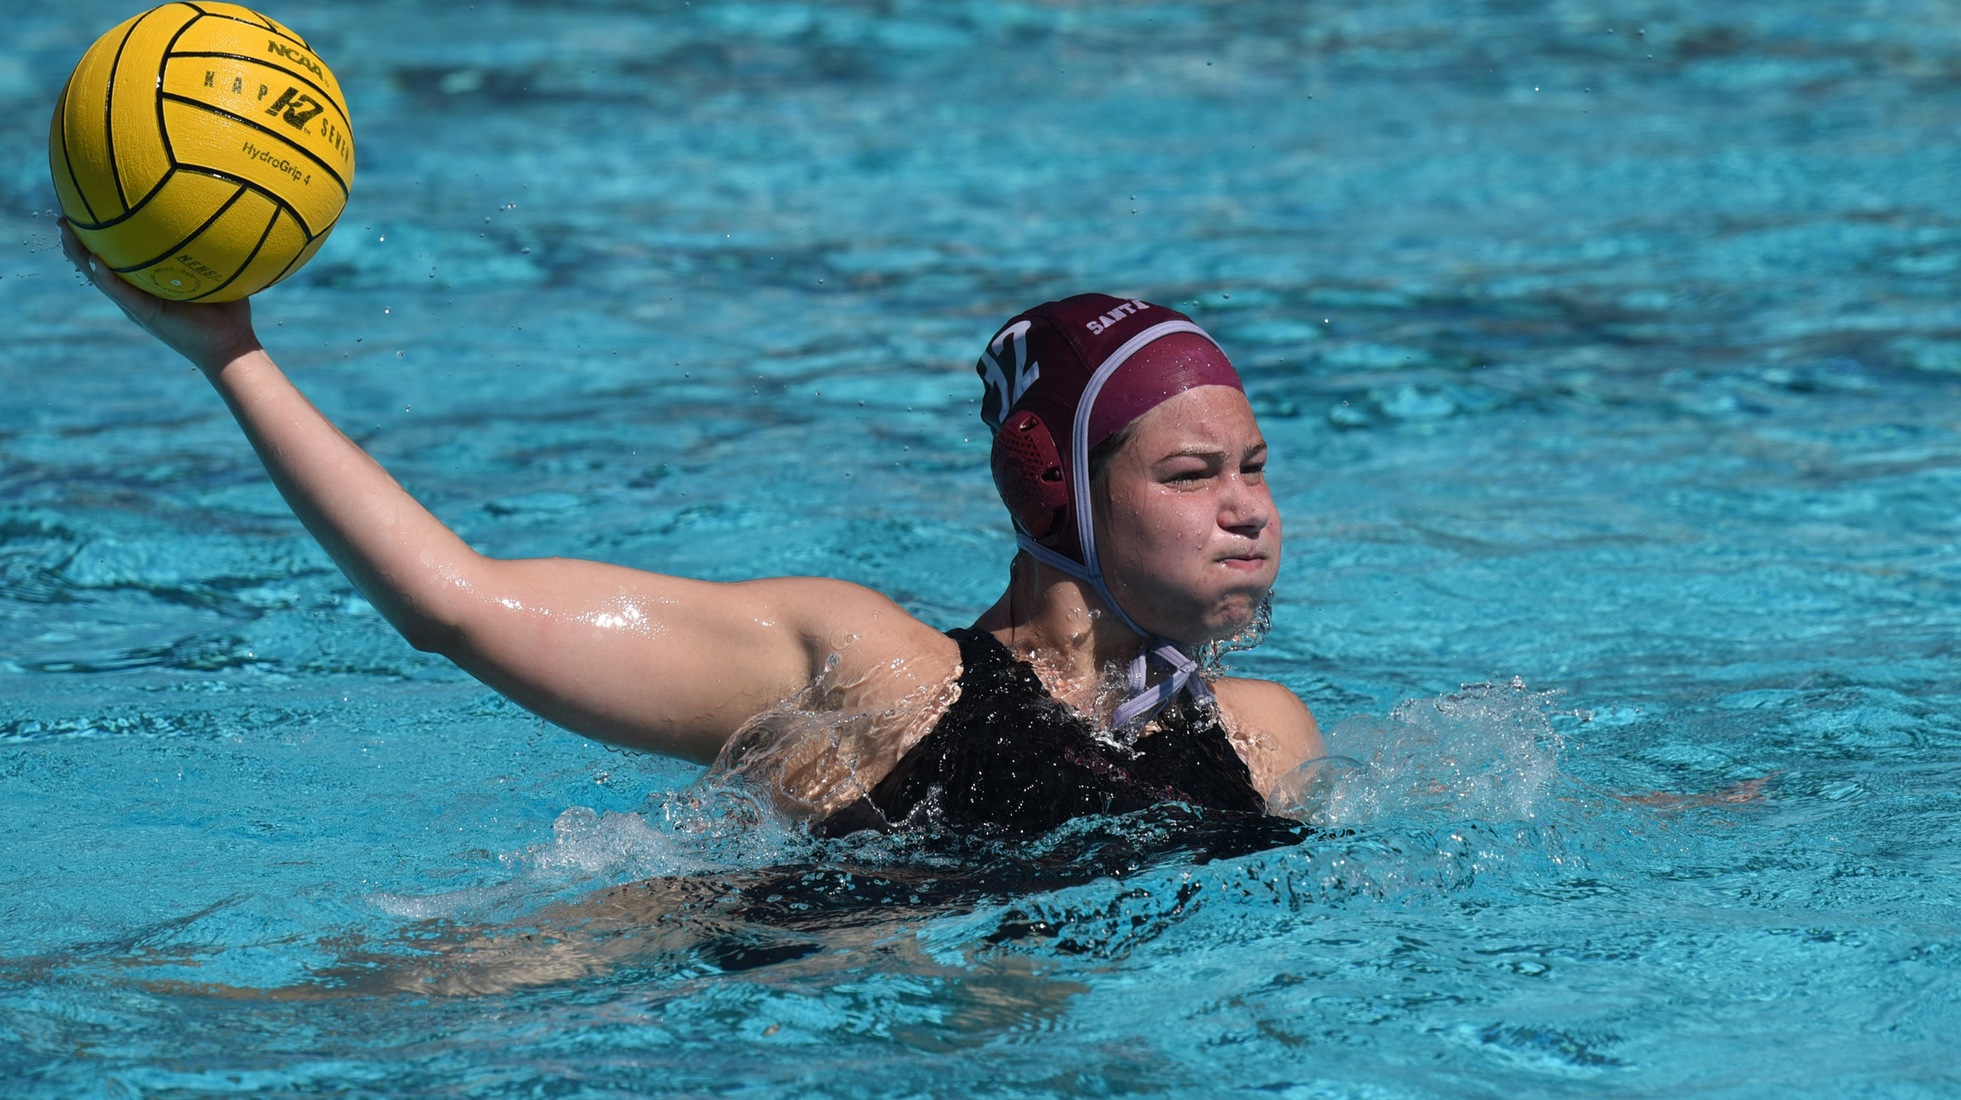 Women’s Water Polo Travels This Week for Conference Games